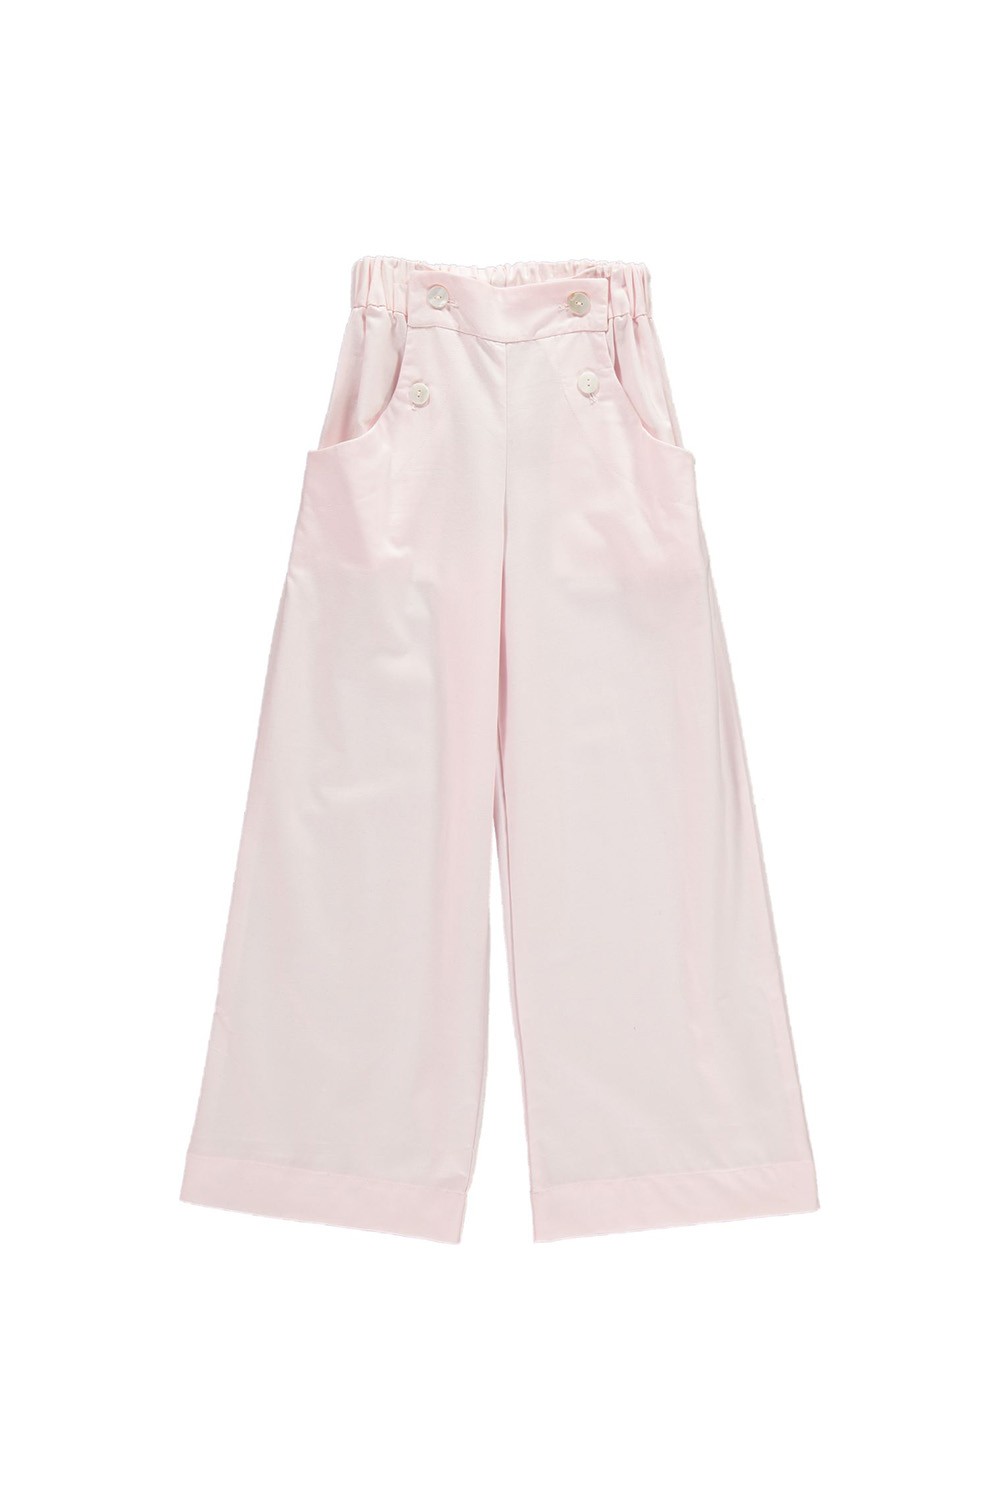 Luco girl's pants made of pink cotton